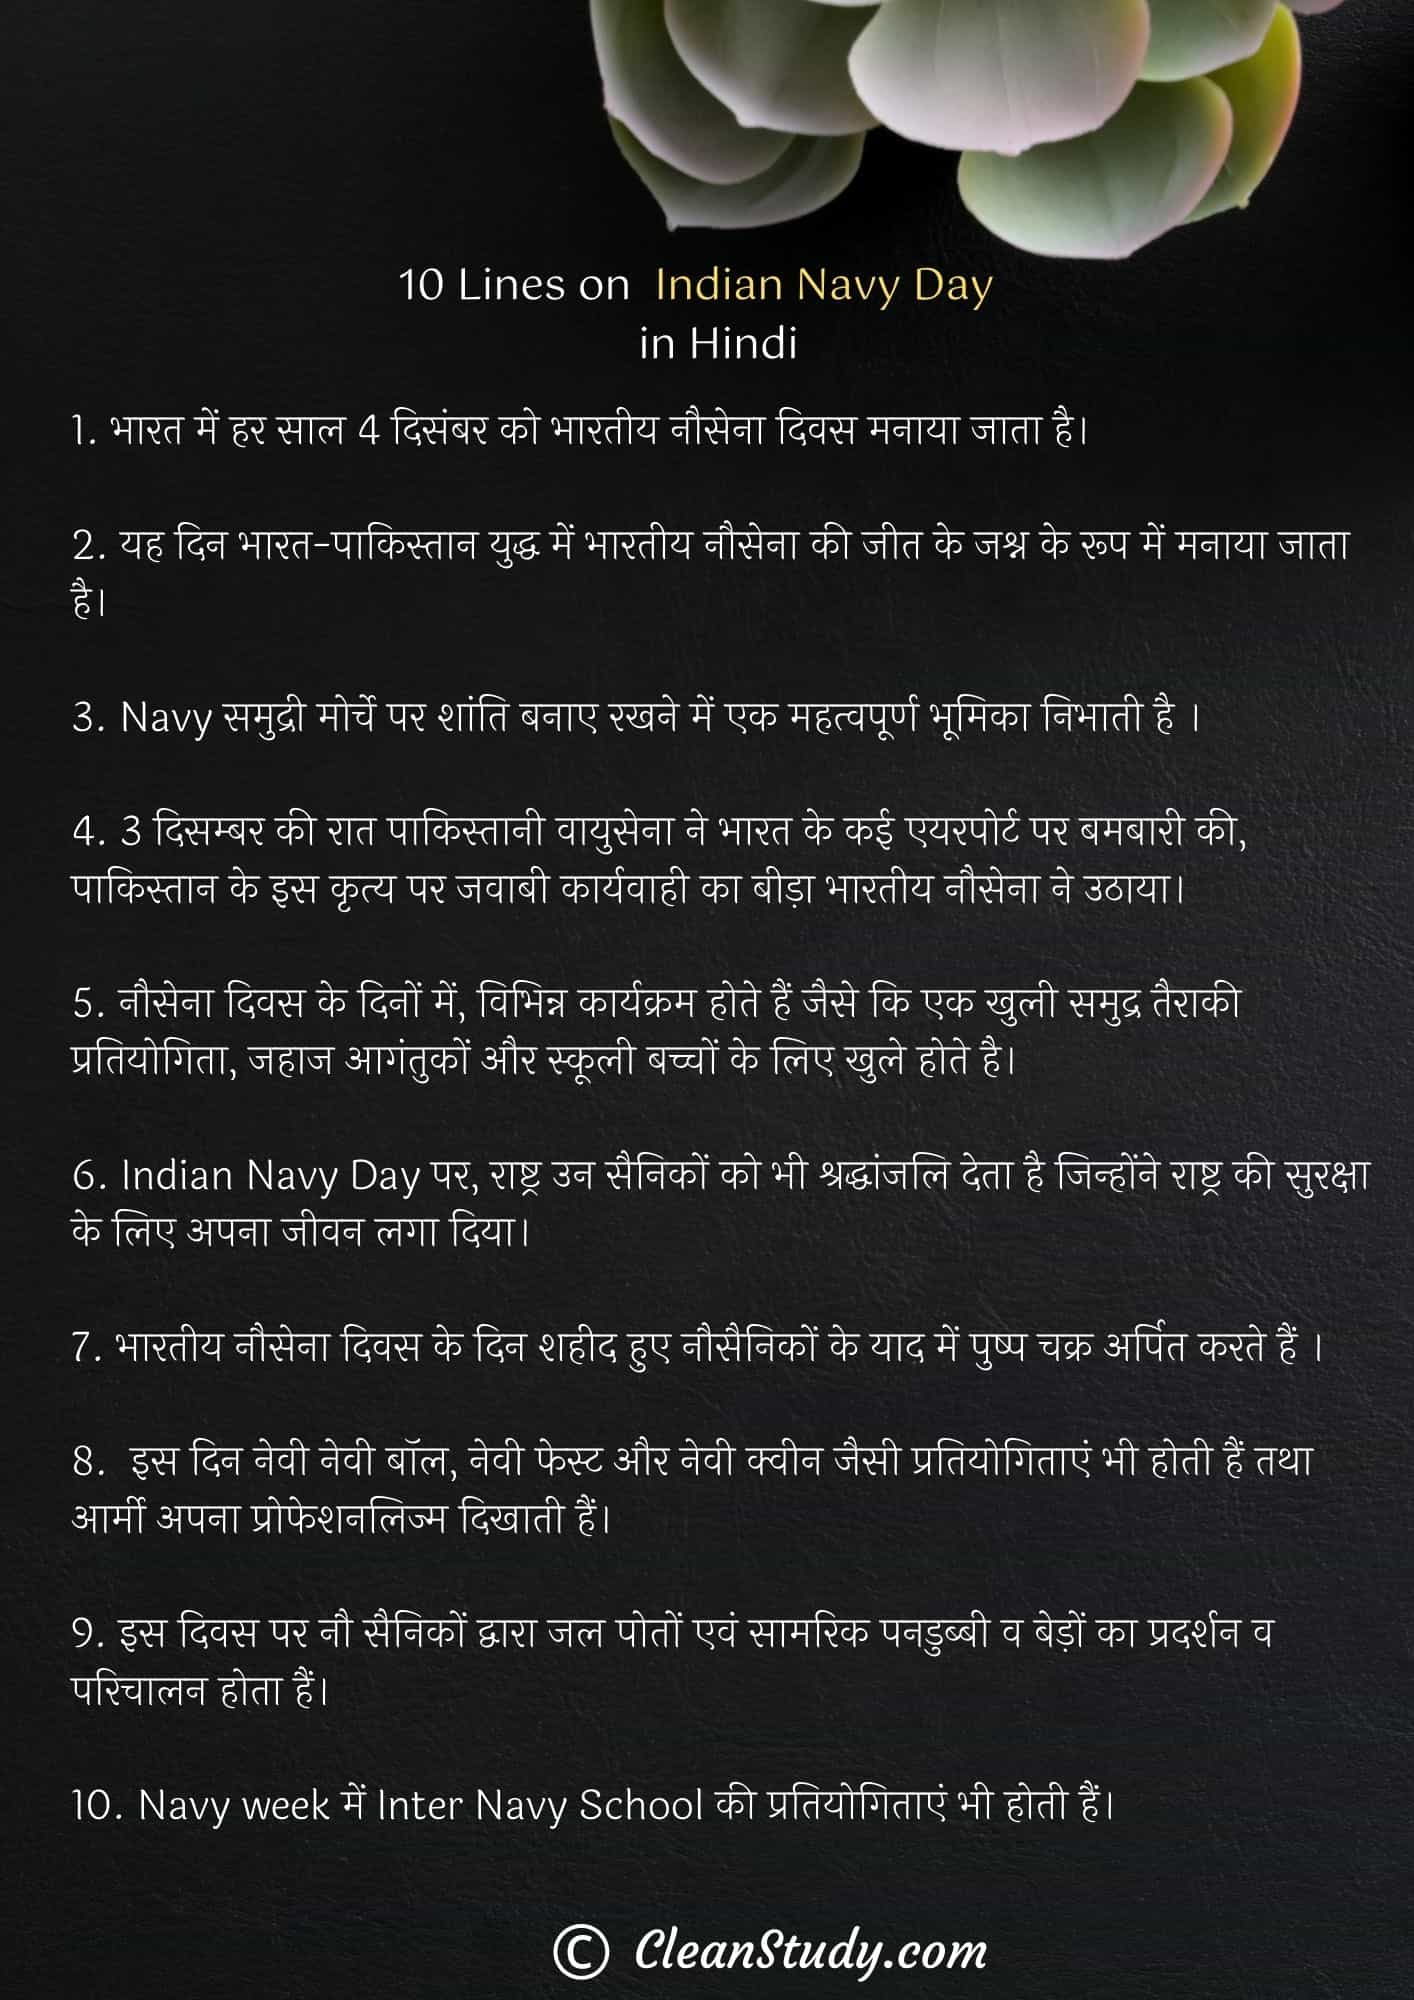  10 Lines on Indian Navy Day in Hindi